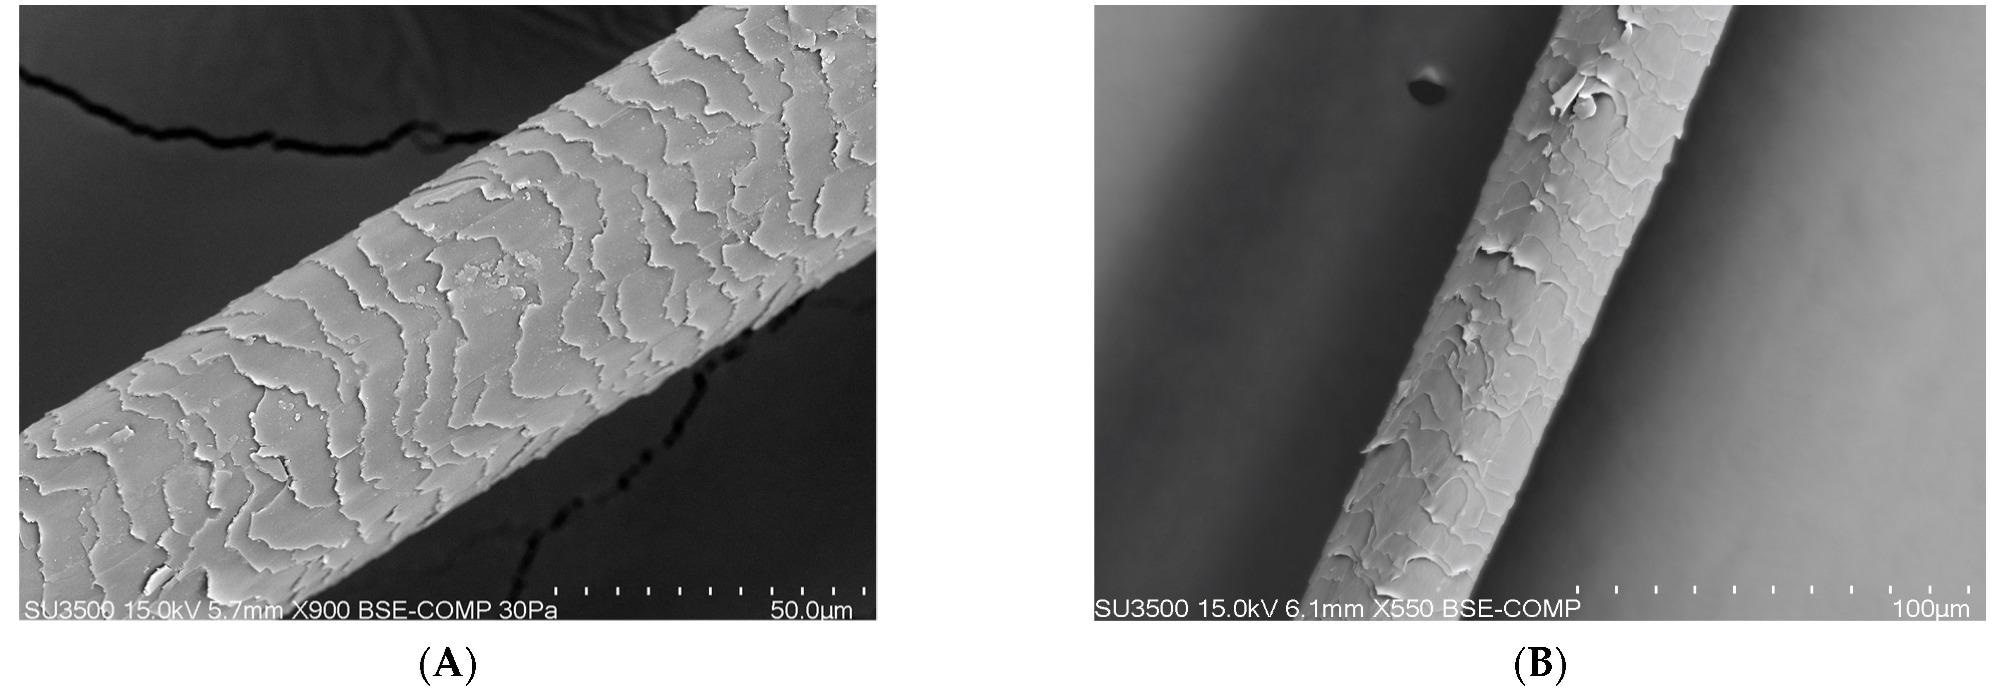 (A) Photo of the hair of proband A before the application of collagen laminate (50-micron × 900, 15 kilowatt-hours). (B) Photo of the hair of proband B before the application of collagen laminate (100-micron × 550, 15 kilowatt-hours).